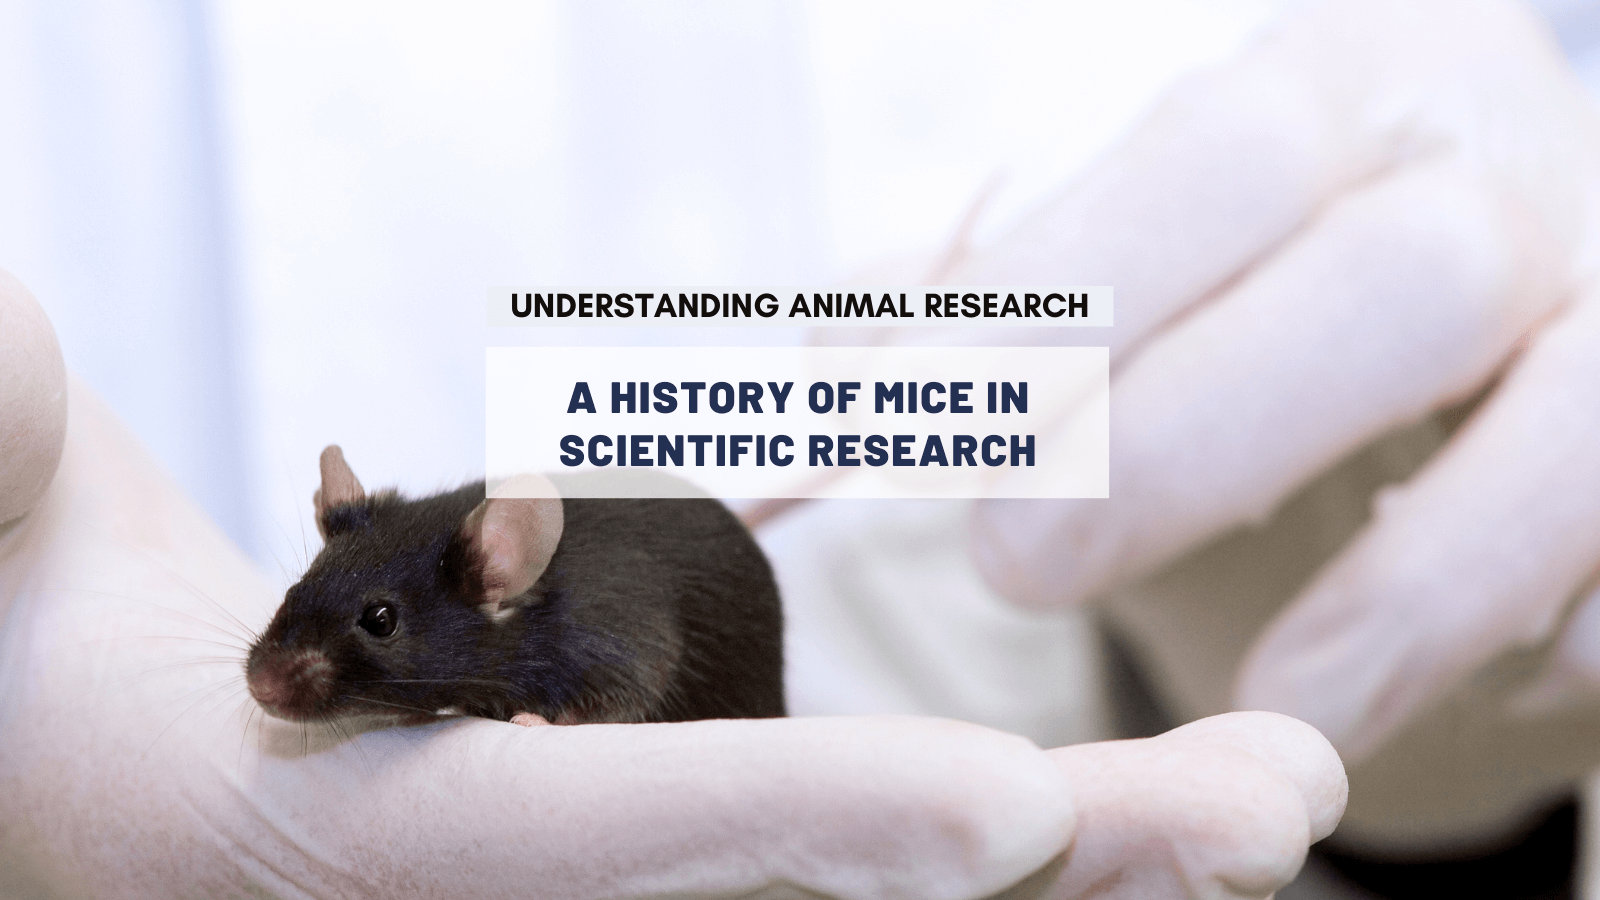 A history of mice in scientific research :: Understanding Animal Research